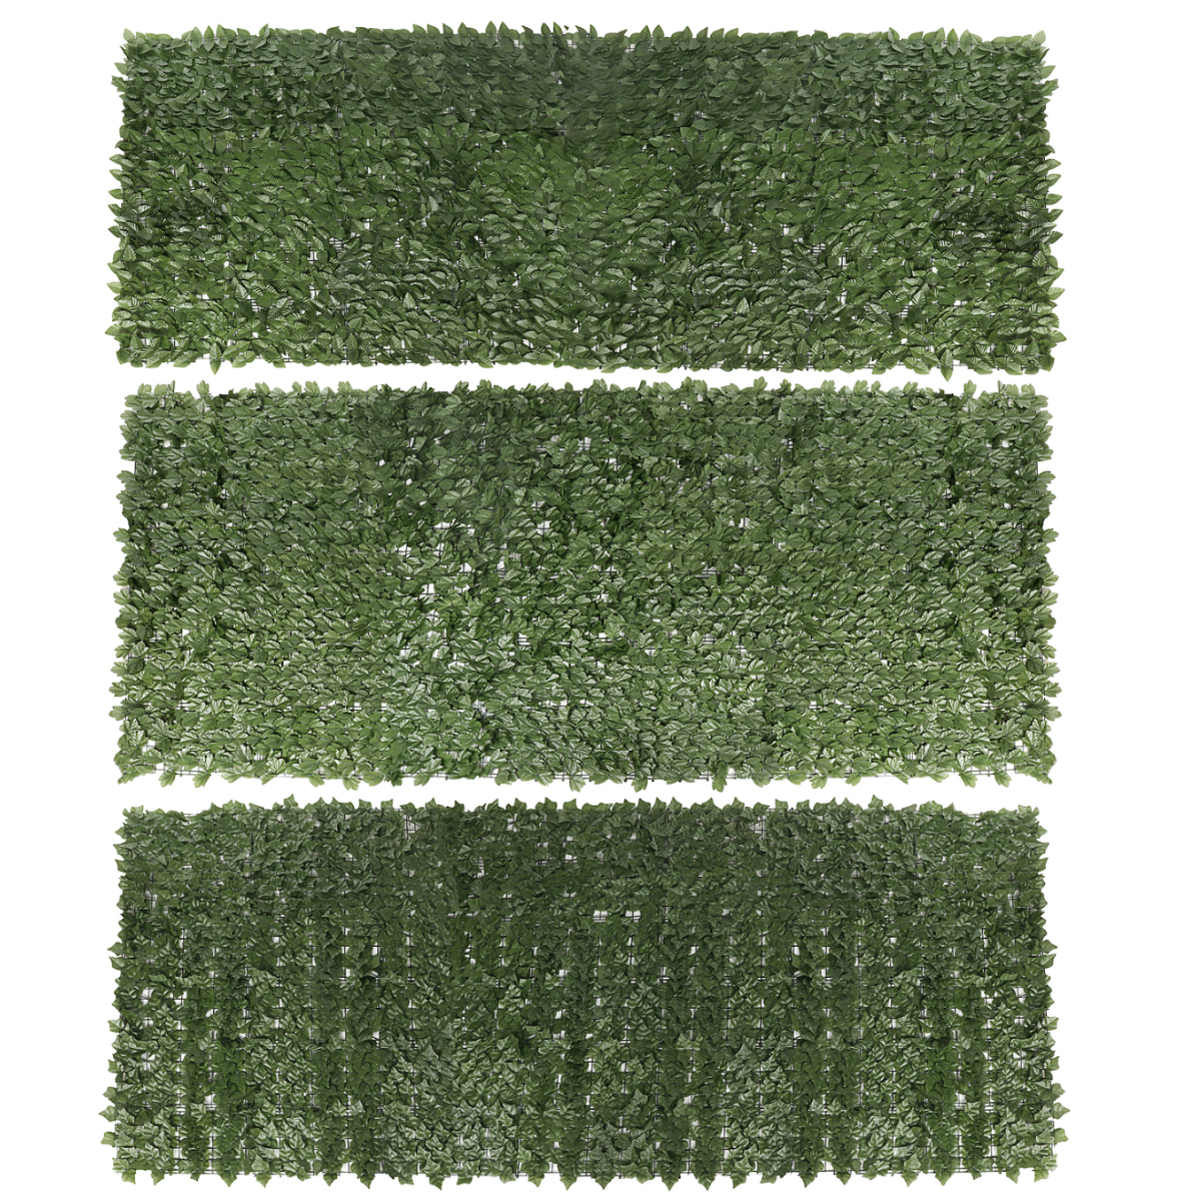 5Mx15M-Faux-Artificial-Ivy-Leaf-Privacy-Fence-Screen-Hedge-Decorative-Garden-1794319-6